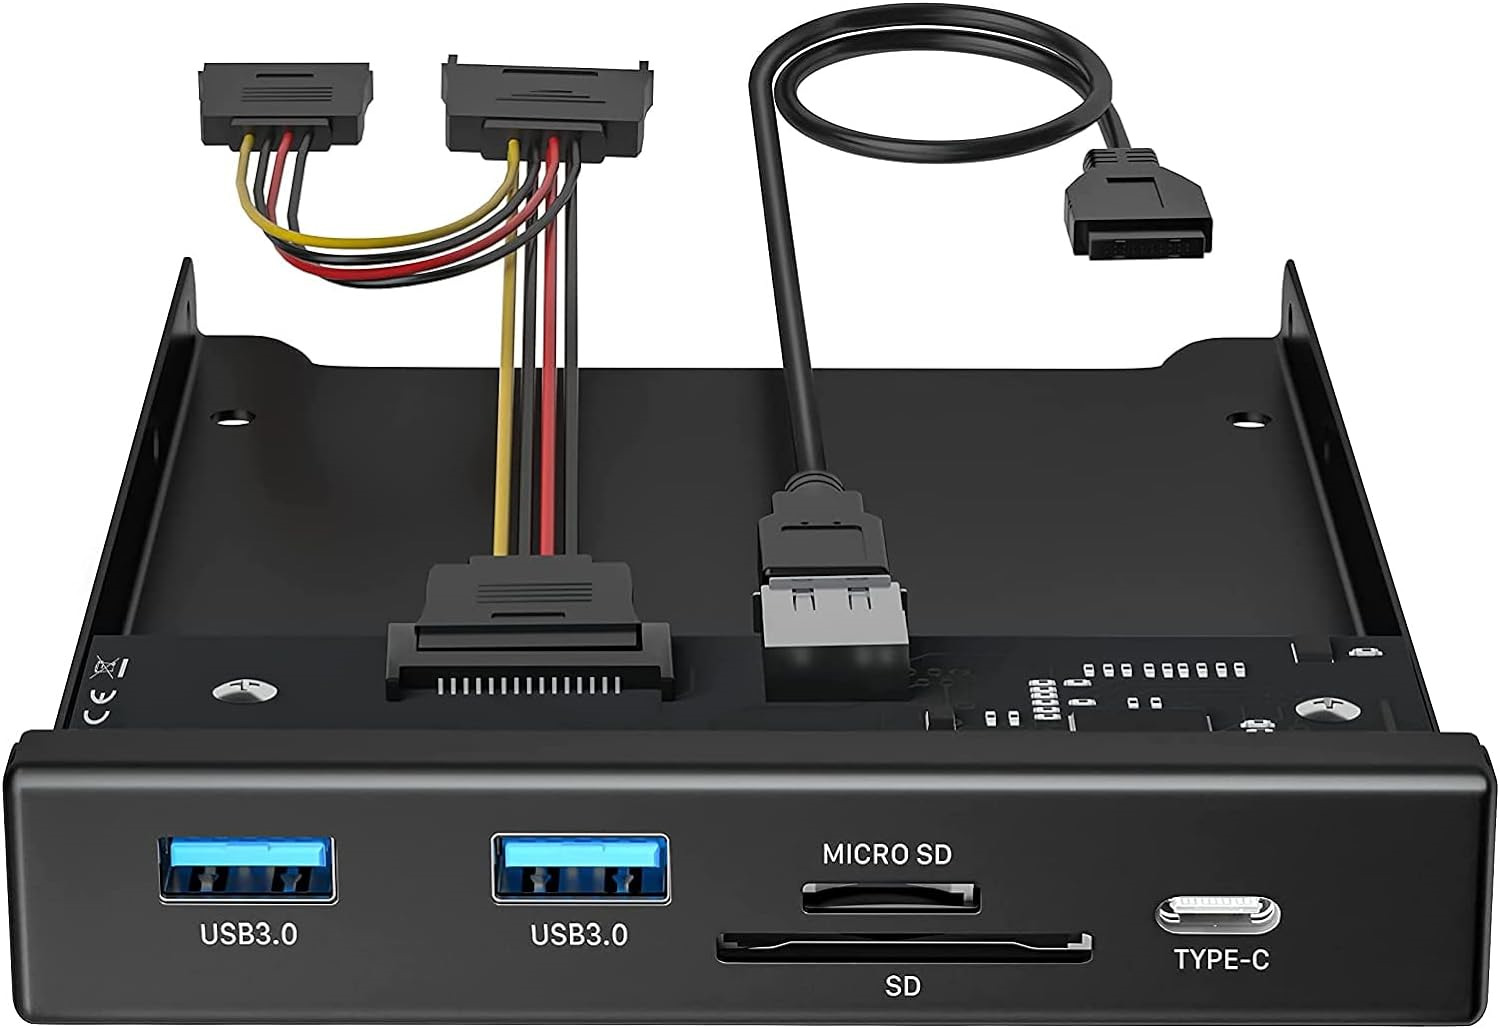 BYEASY Front Panel USB 3.0 Hub, 5 Ports 3.5 Inches Internal Metal USB Hub with 2